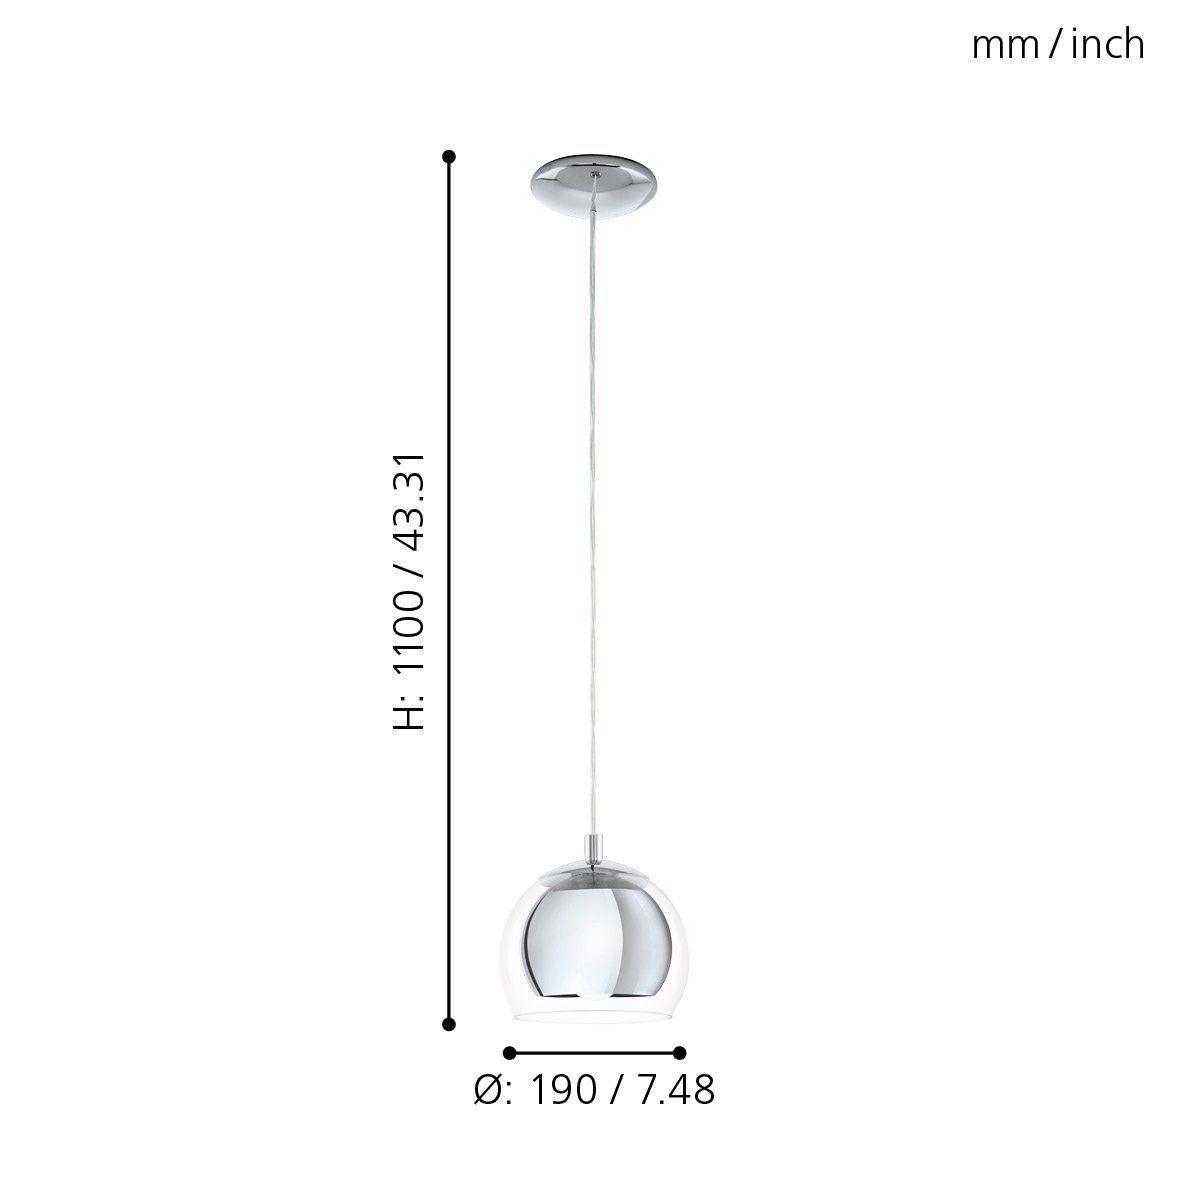 ROCAMAR Pendant Light by The Light Library